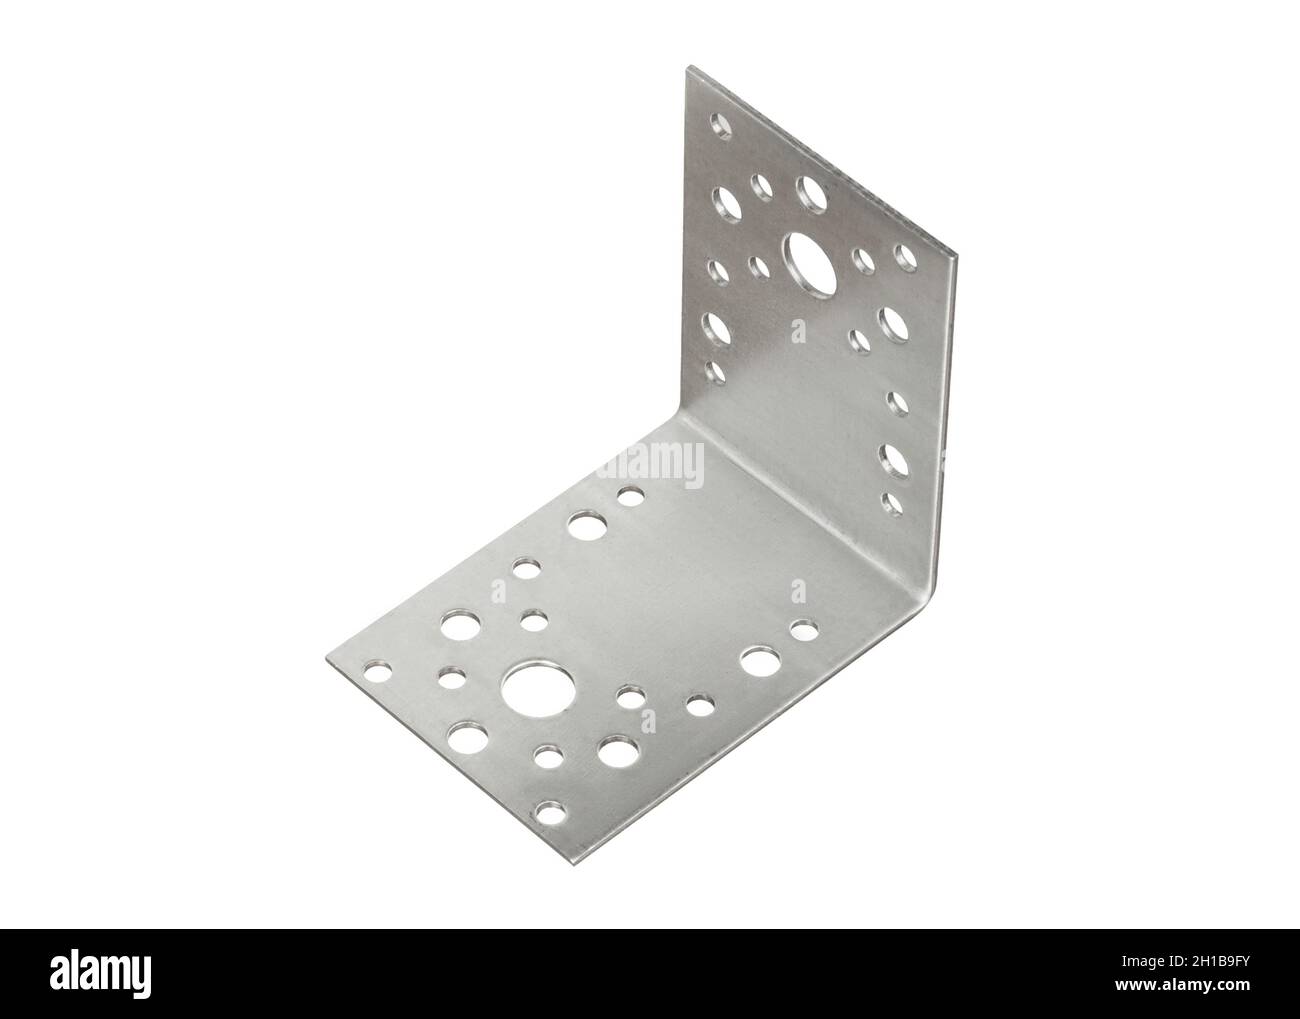 Stainless steel metal fixing angle isolated on white background. The metal corner is used in construction for the installation of various parts. Stock Photo